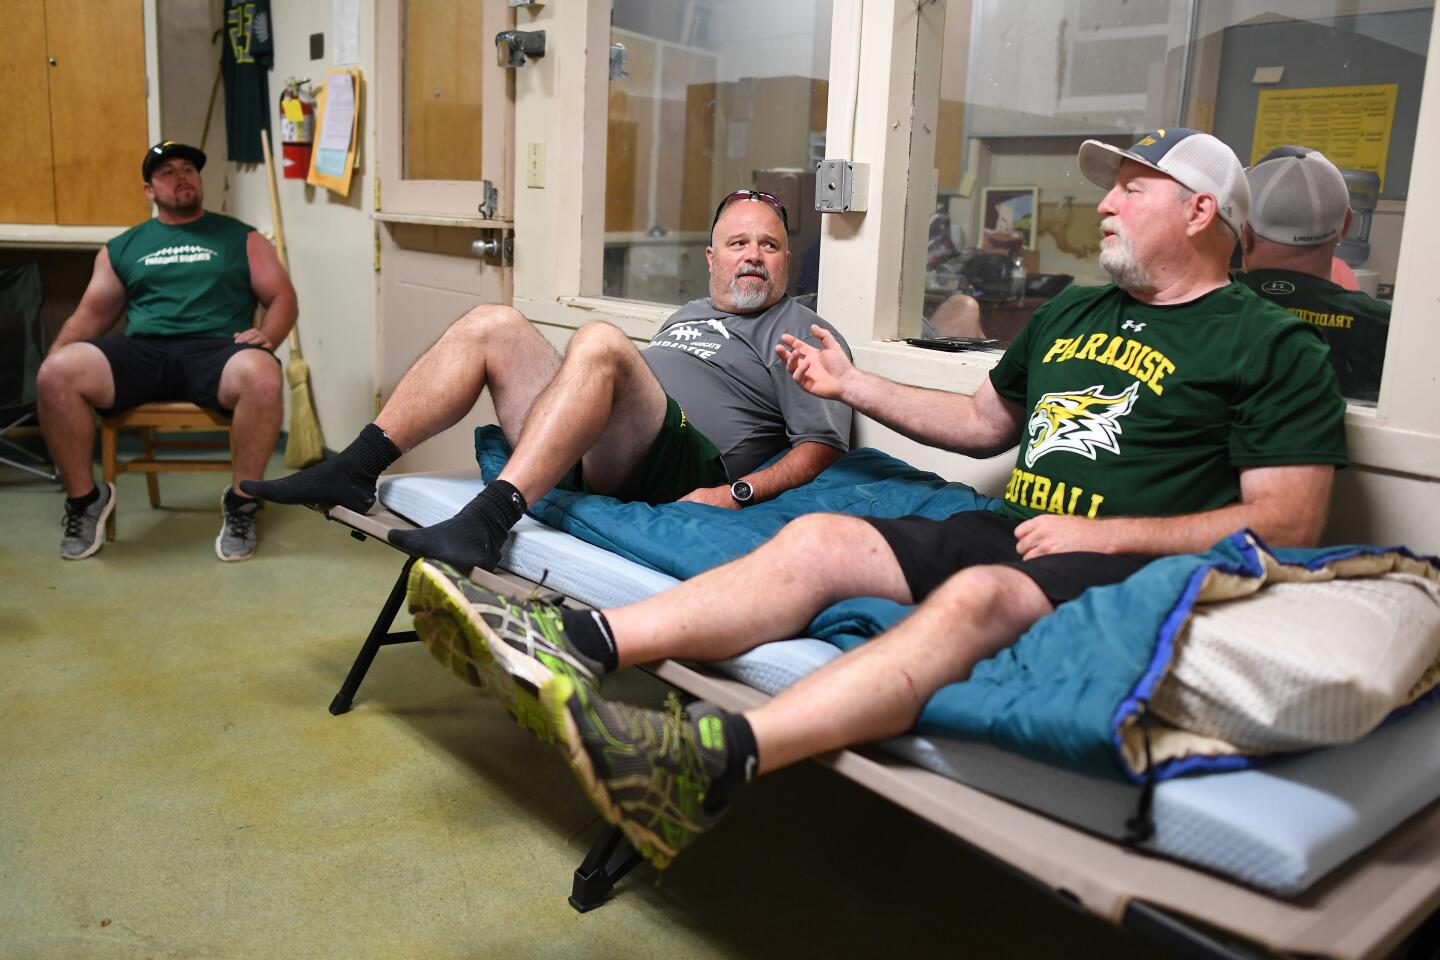 Paradise coach coach Rick Prinz, right, speaks with assistants Bobby Richards, left, and Nino Pinocchio in his office.